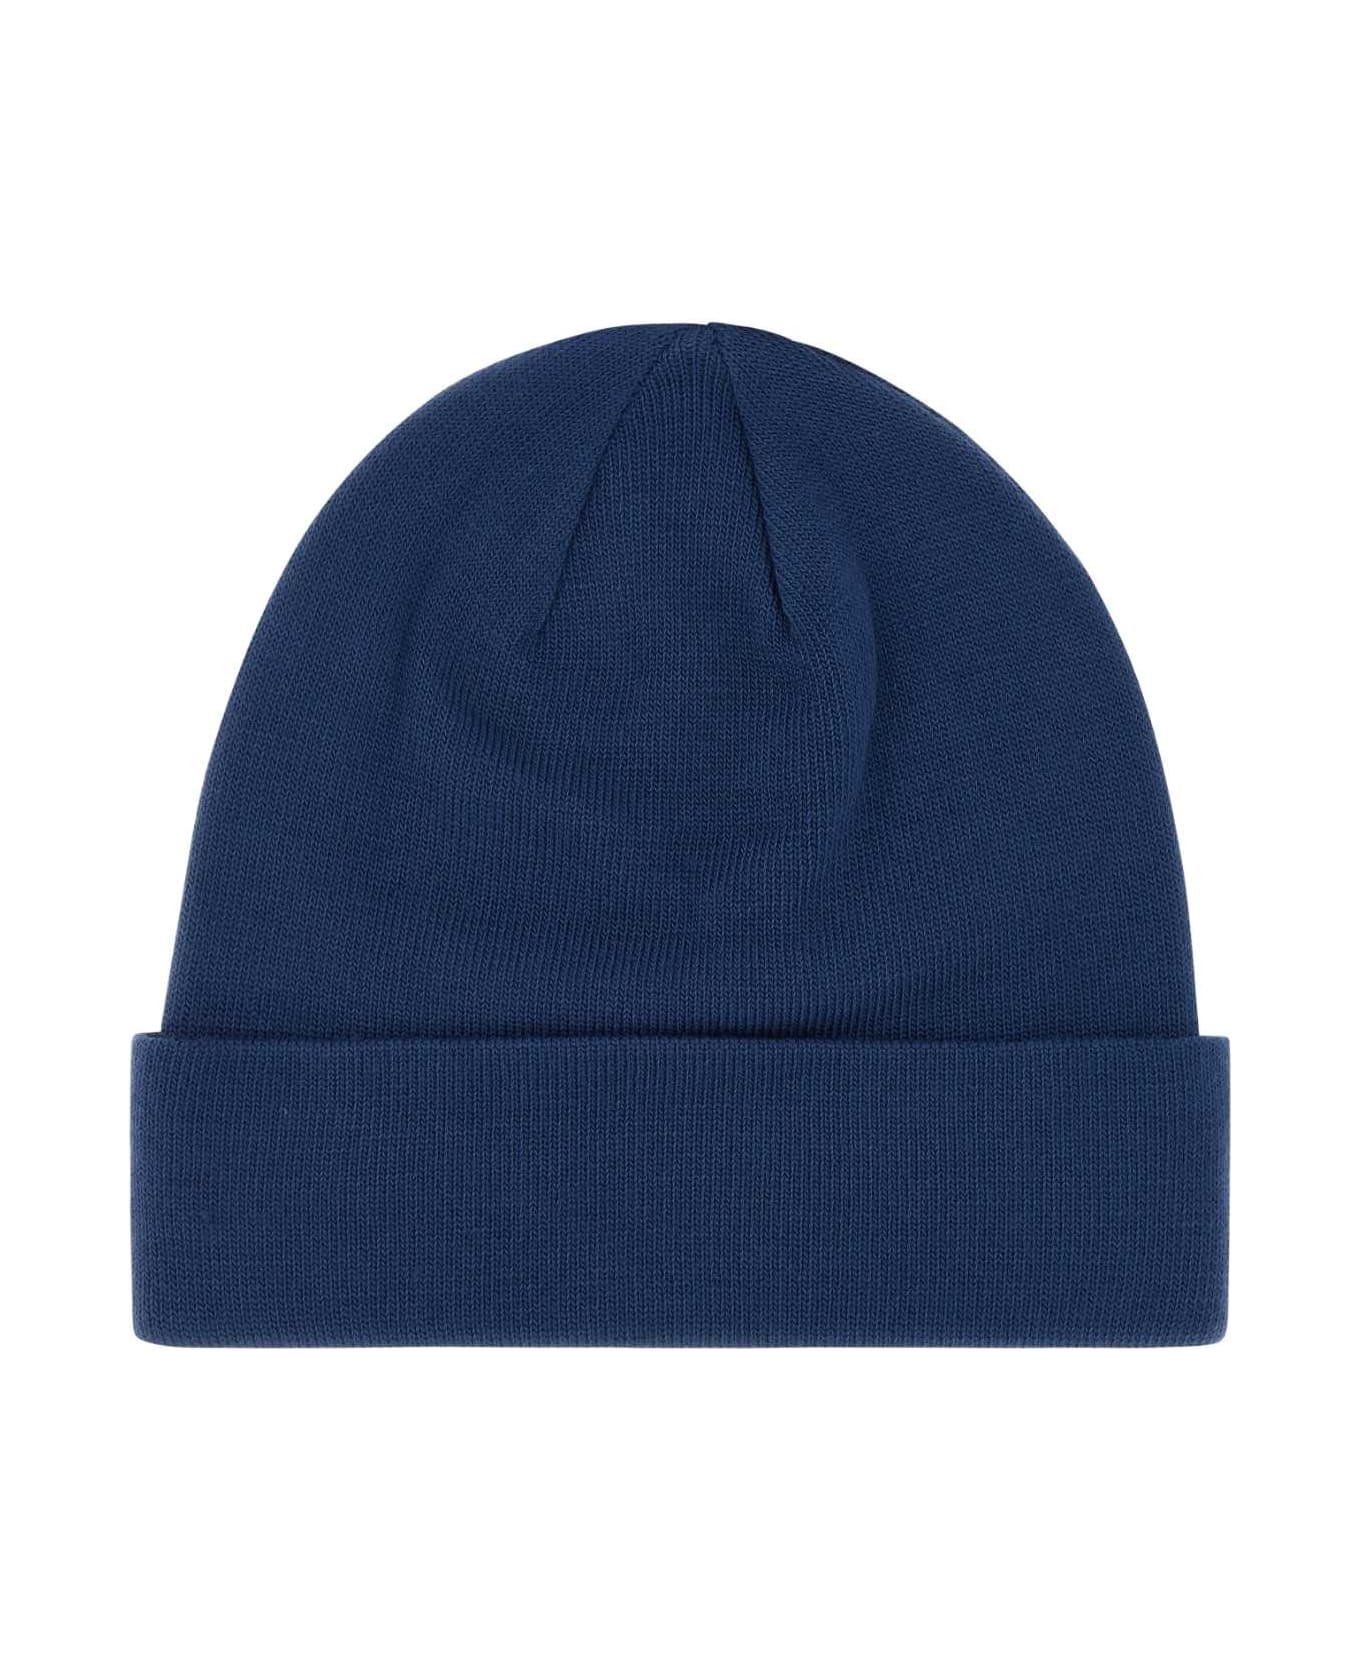 The North Face Navy Blue Stretch Polyester Blend Beanie Hat - SHADY BLUE デジタルアクセサリー